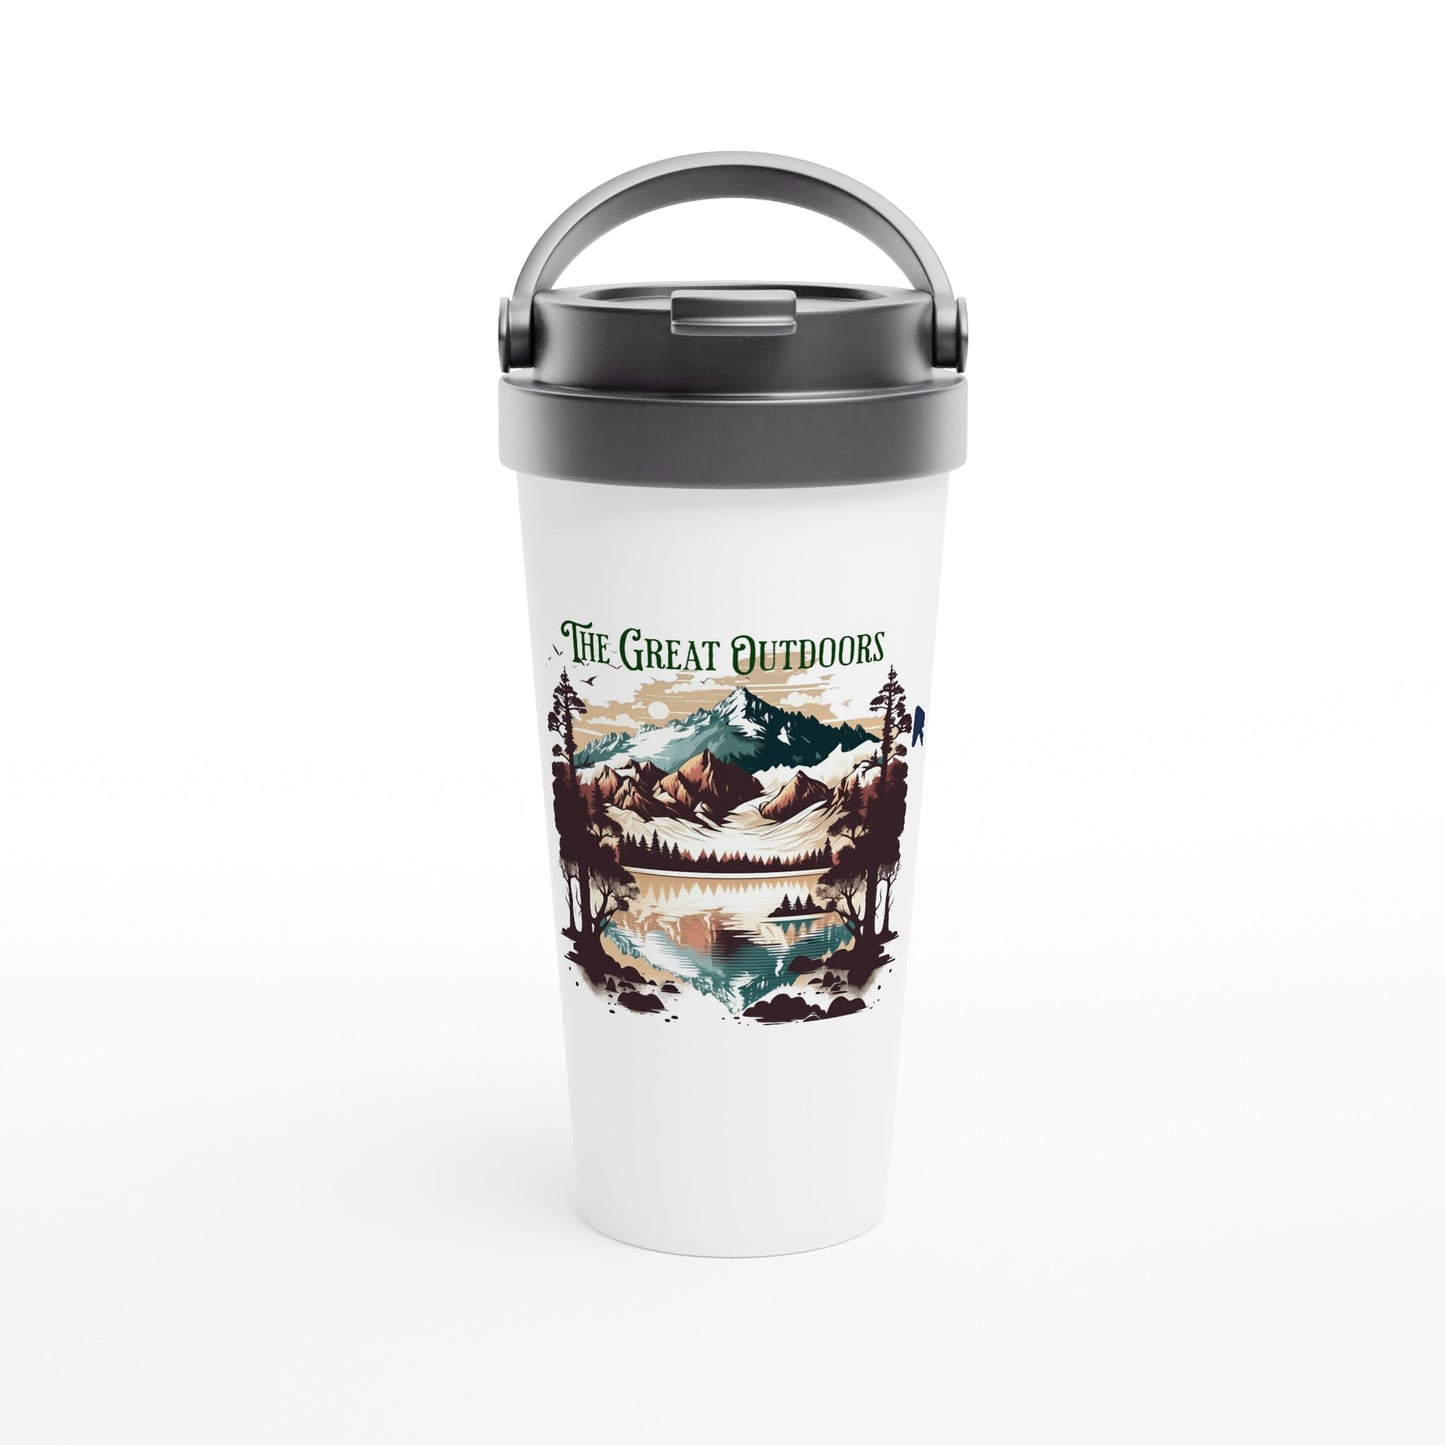 The Great Outdoors White 15oz Stainless Steel Travel Mug at Java Good Coffee